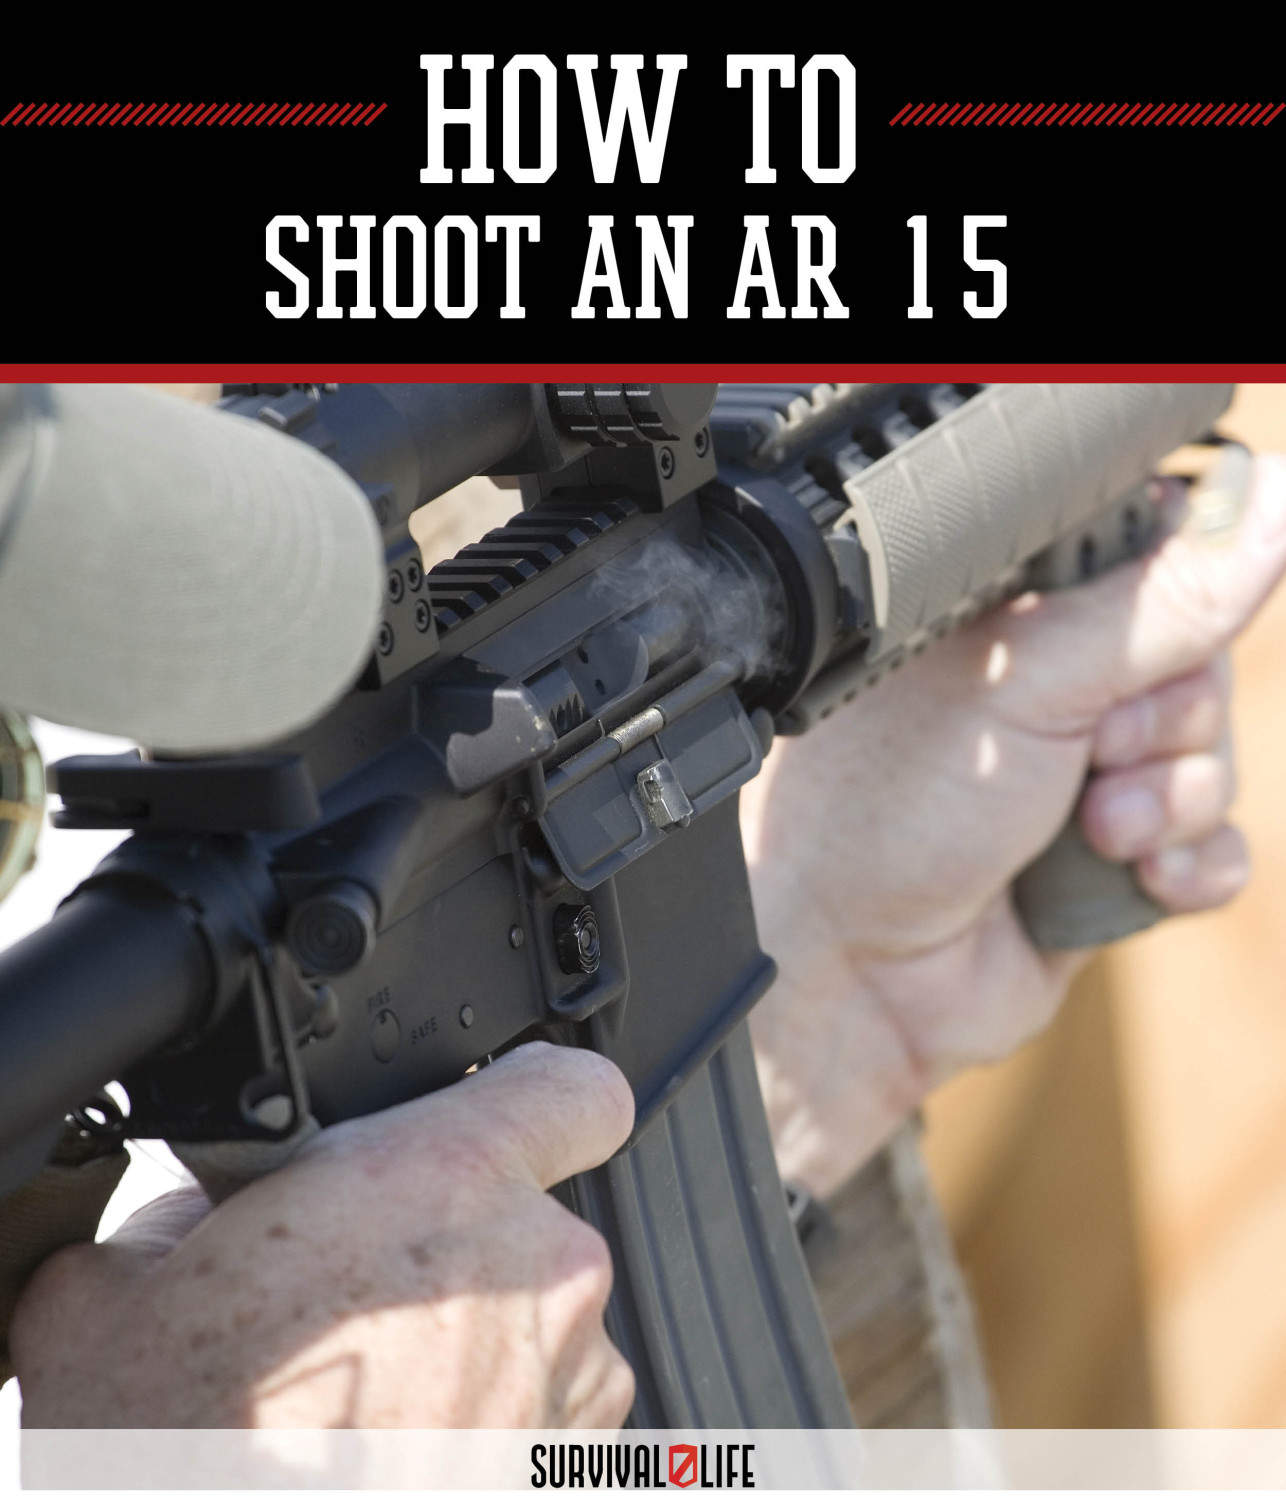 How to Shoot an AR-15 by Survival Life at http://survivallife.staging.wpengine.com/2015/04/24/ar-15-how-to-shoot/